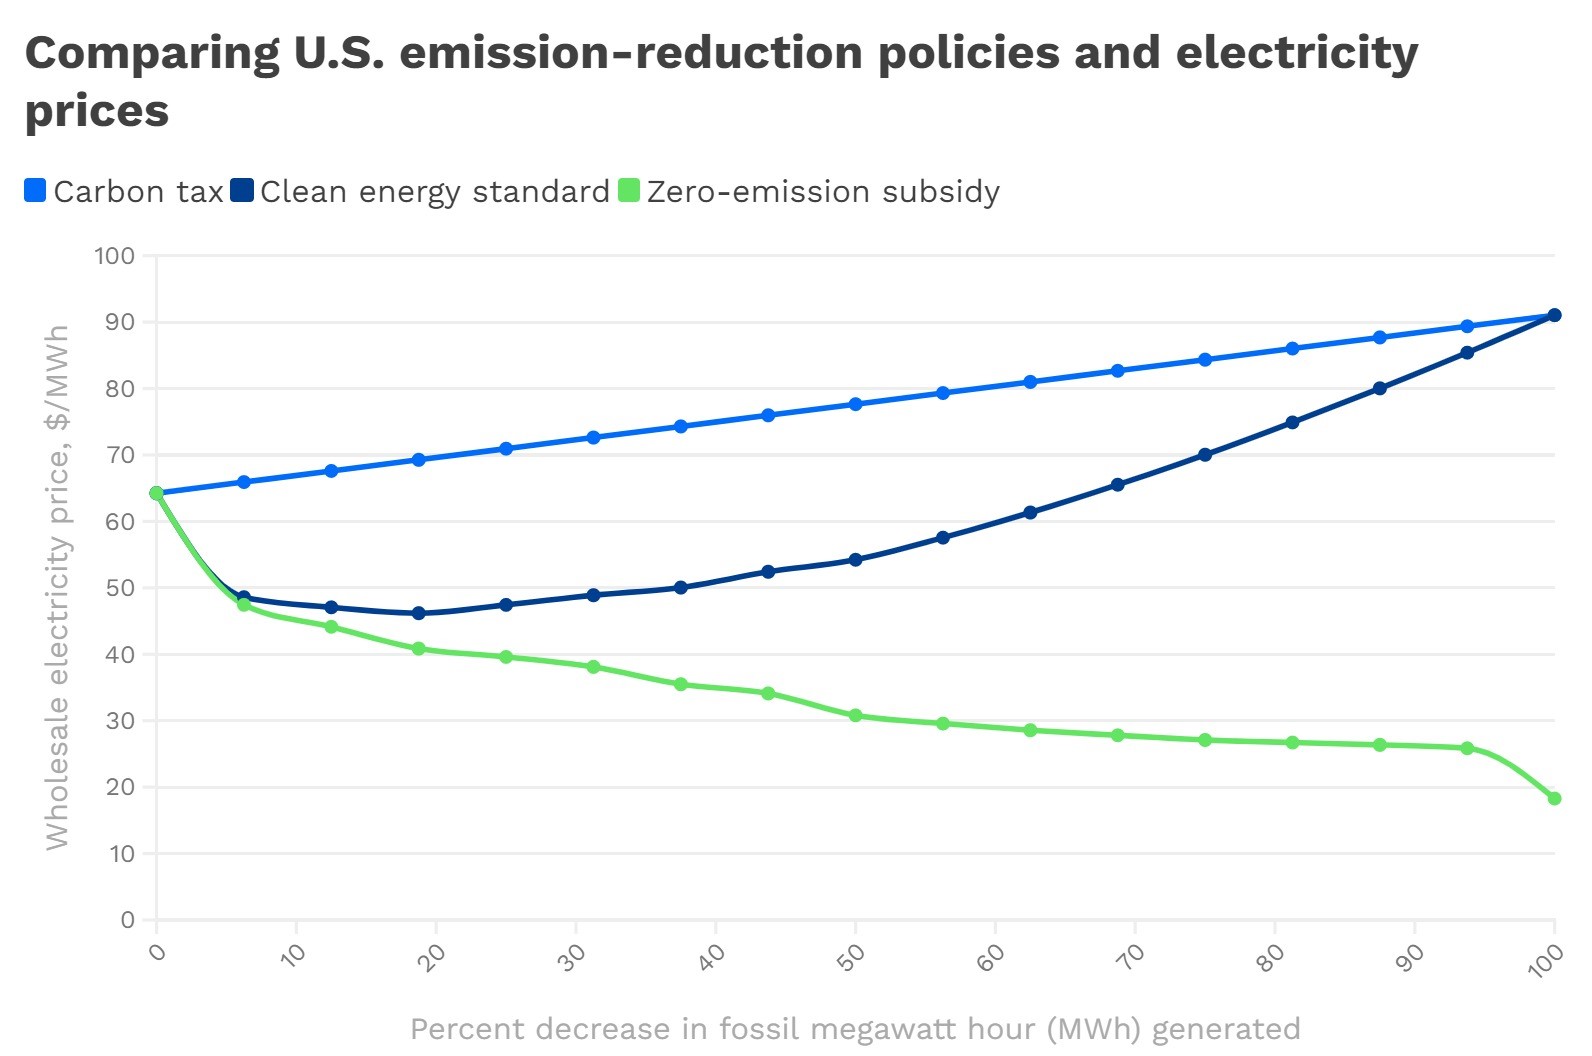 Chart of U.S. emission-reduction policies and electricity prices